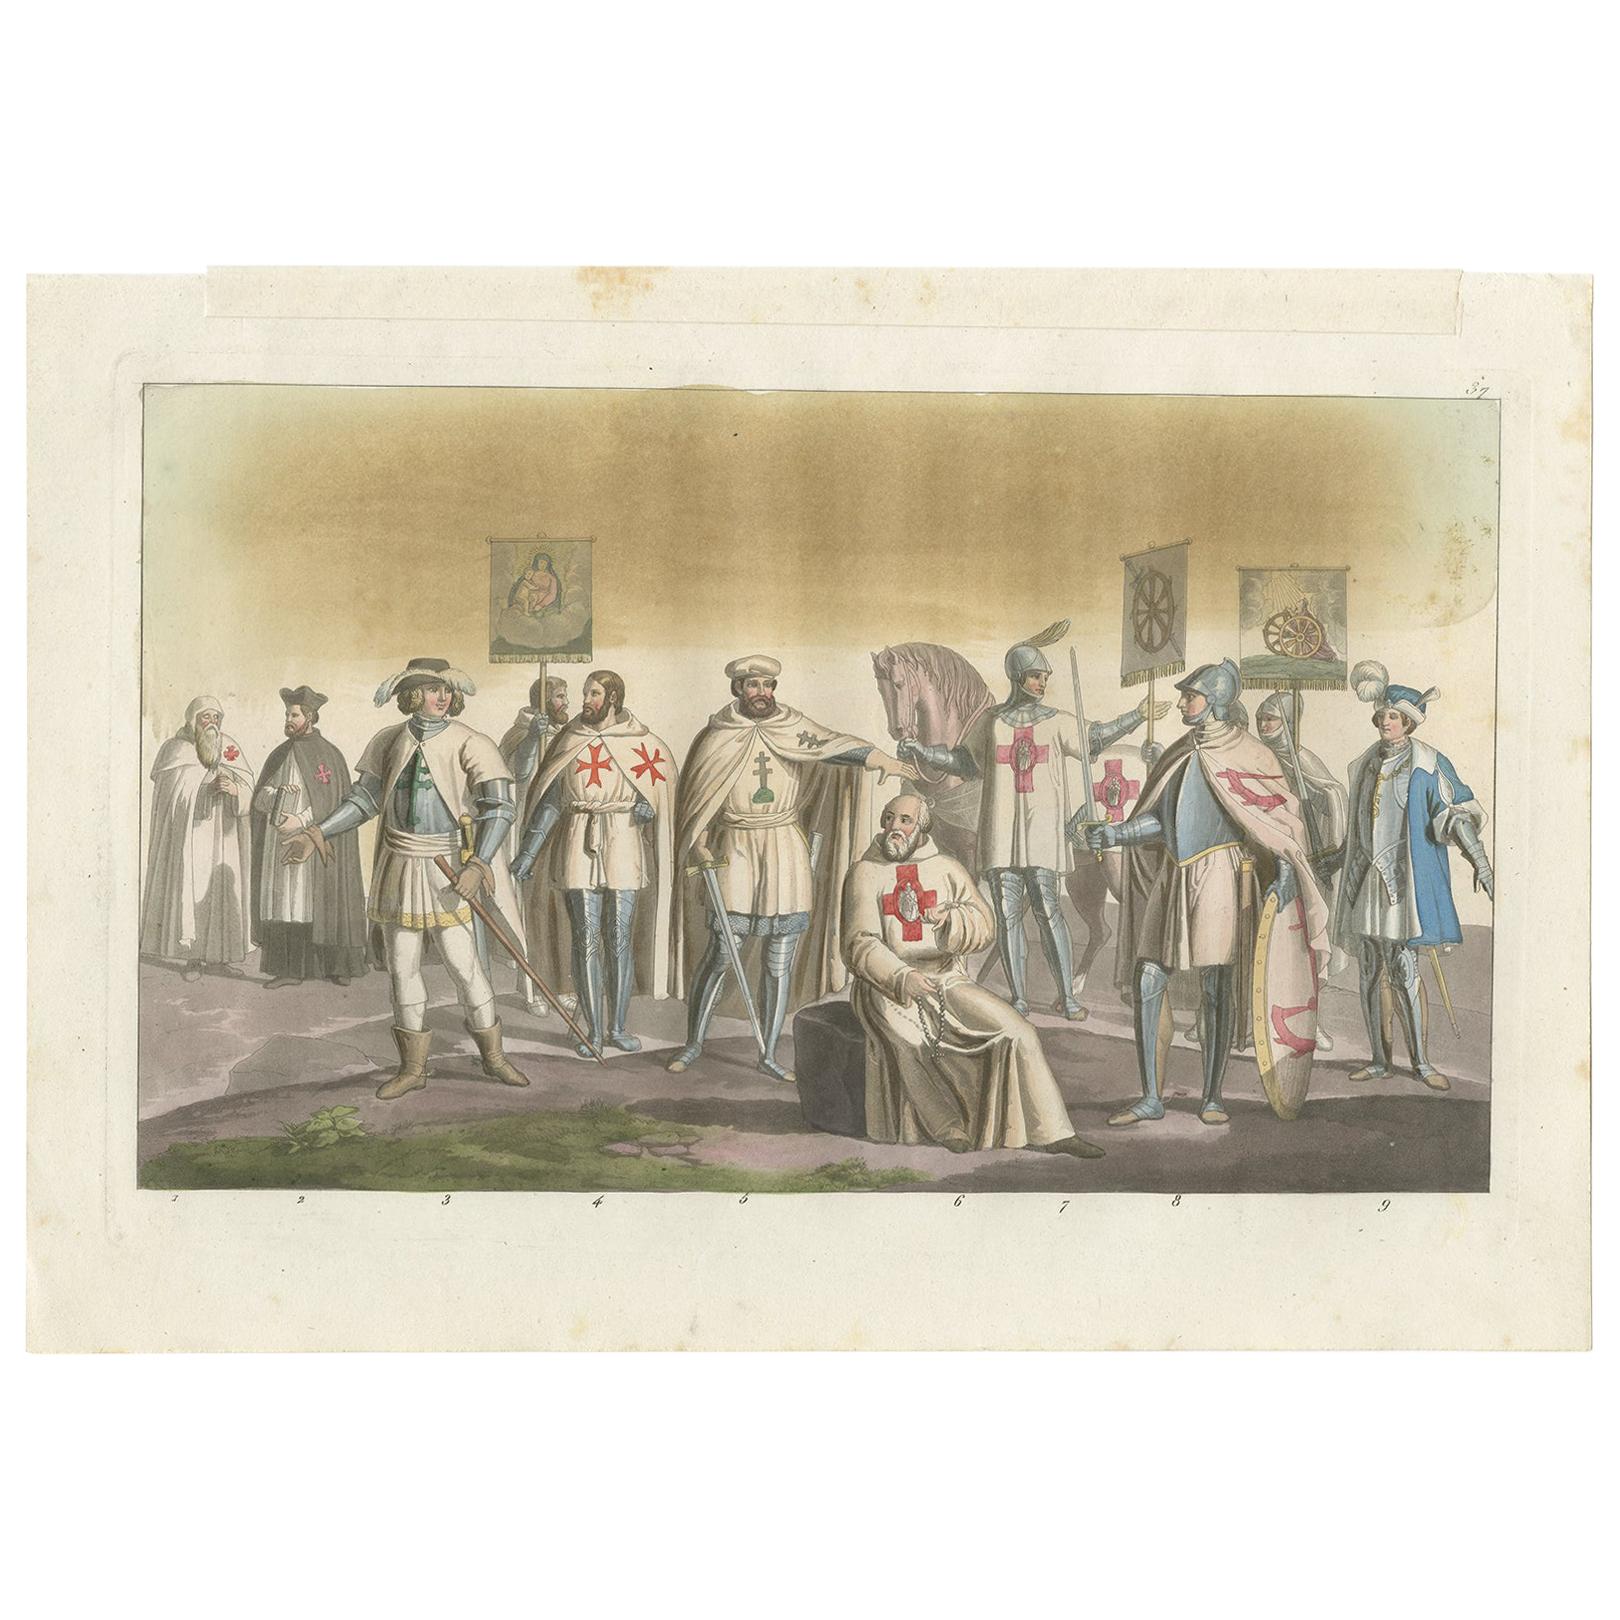 Antique Print of Knights and Costumes by Ferrario, '1831'